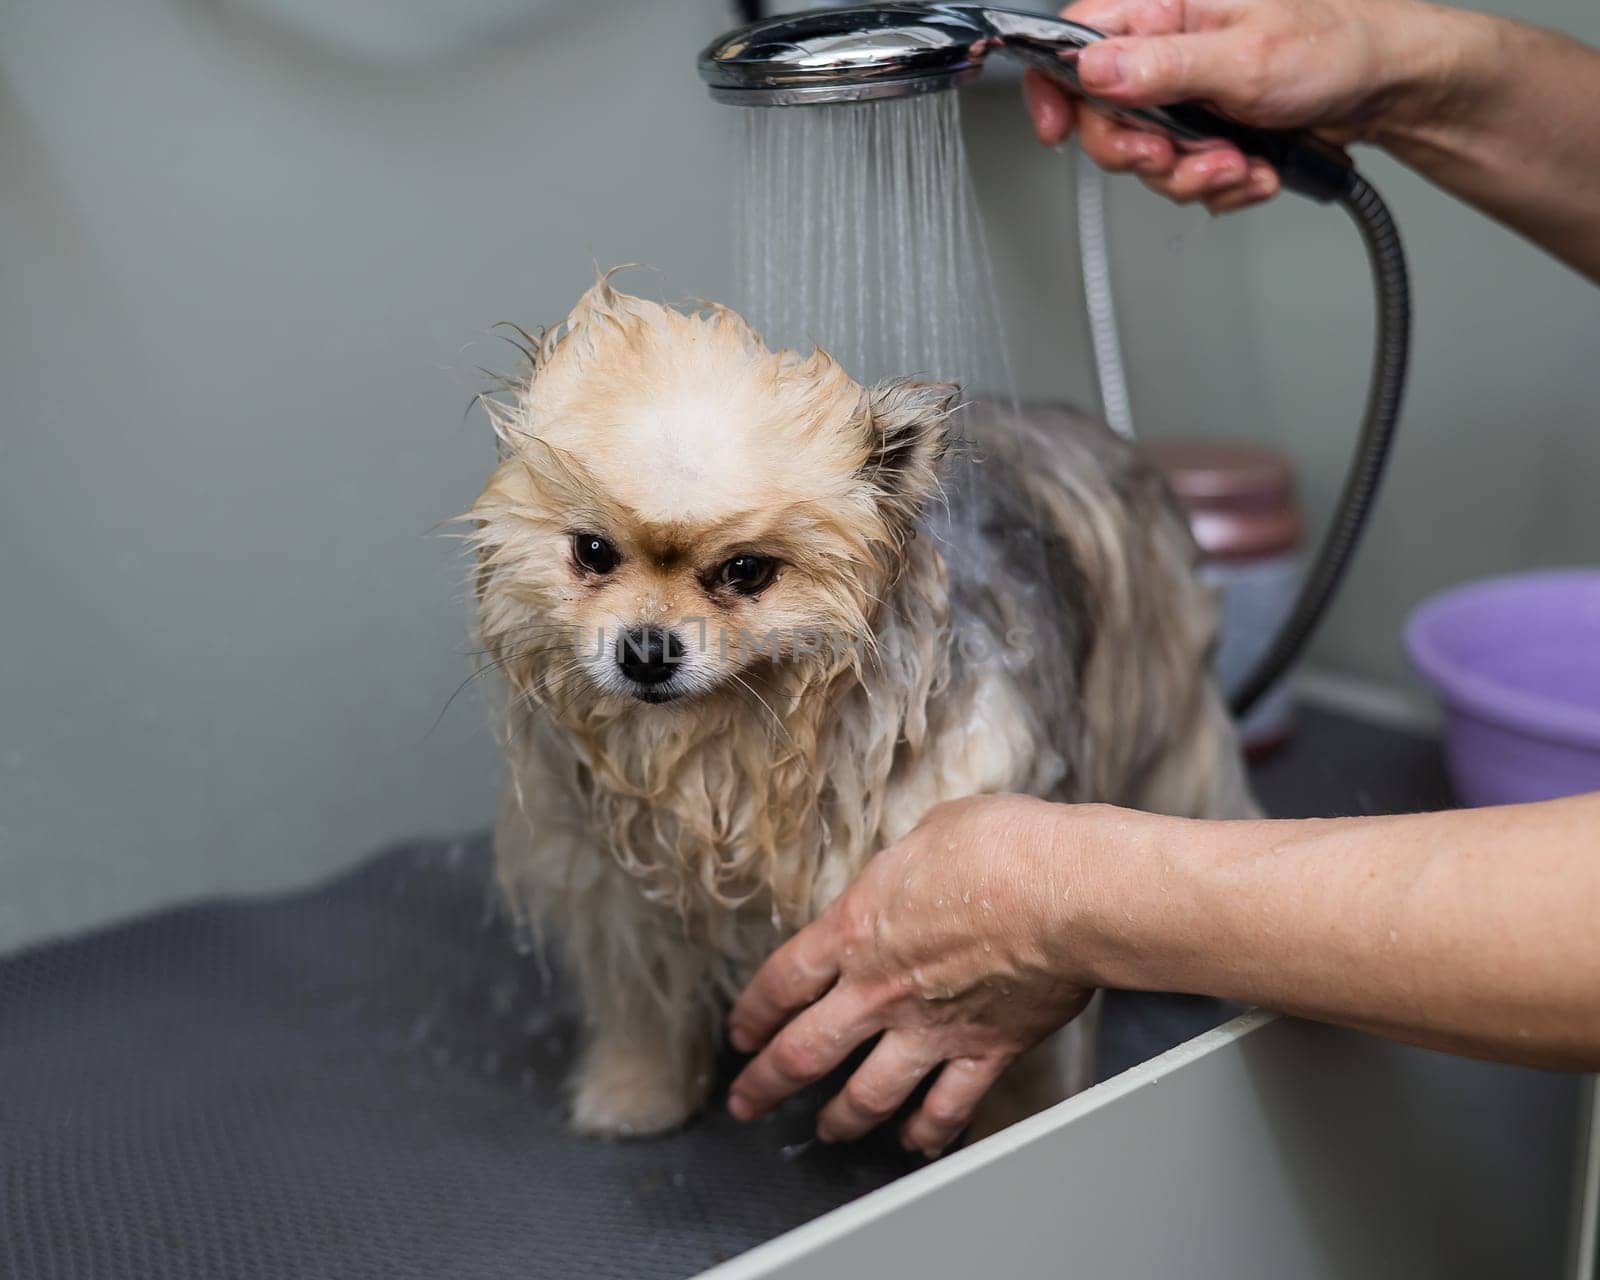 A woman showers a cute Pomeranian dog in a grooming salon. by mrwed54